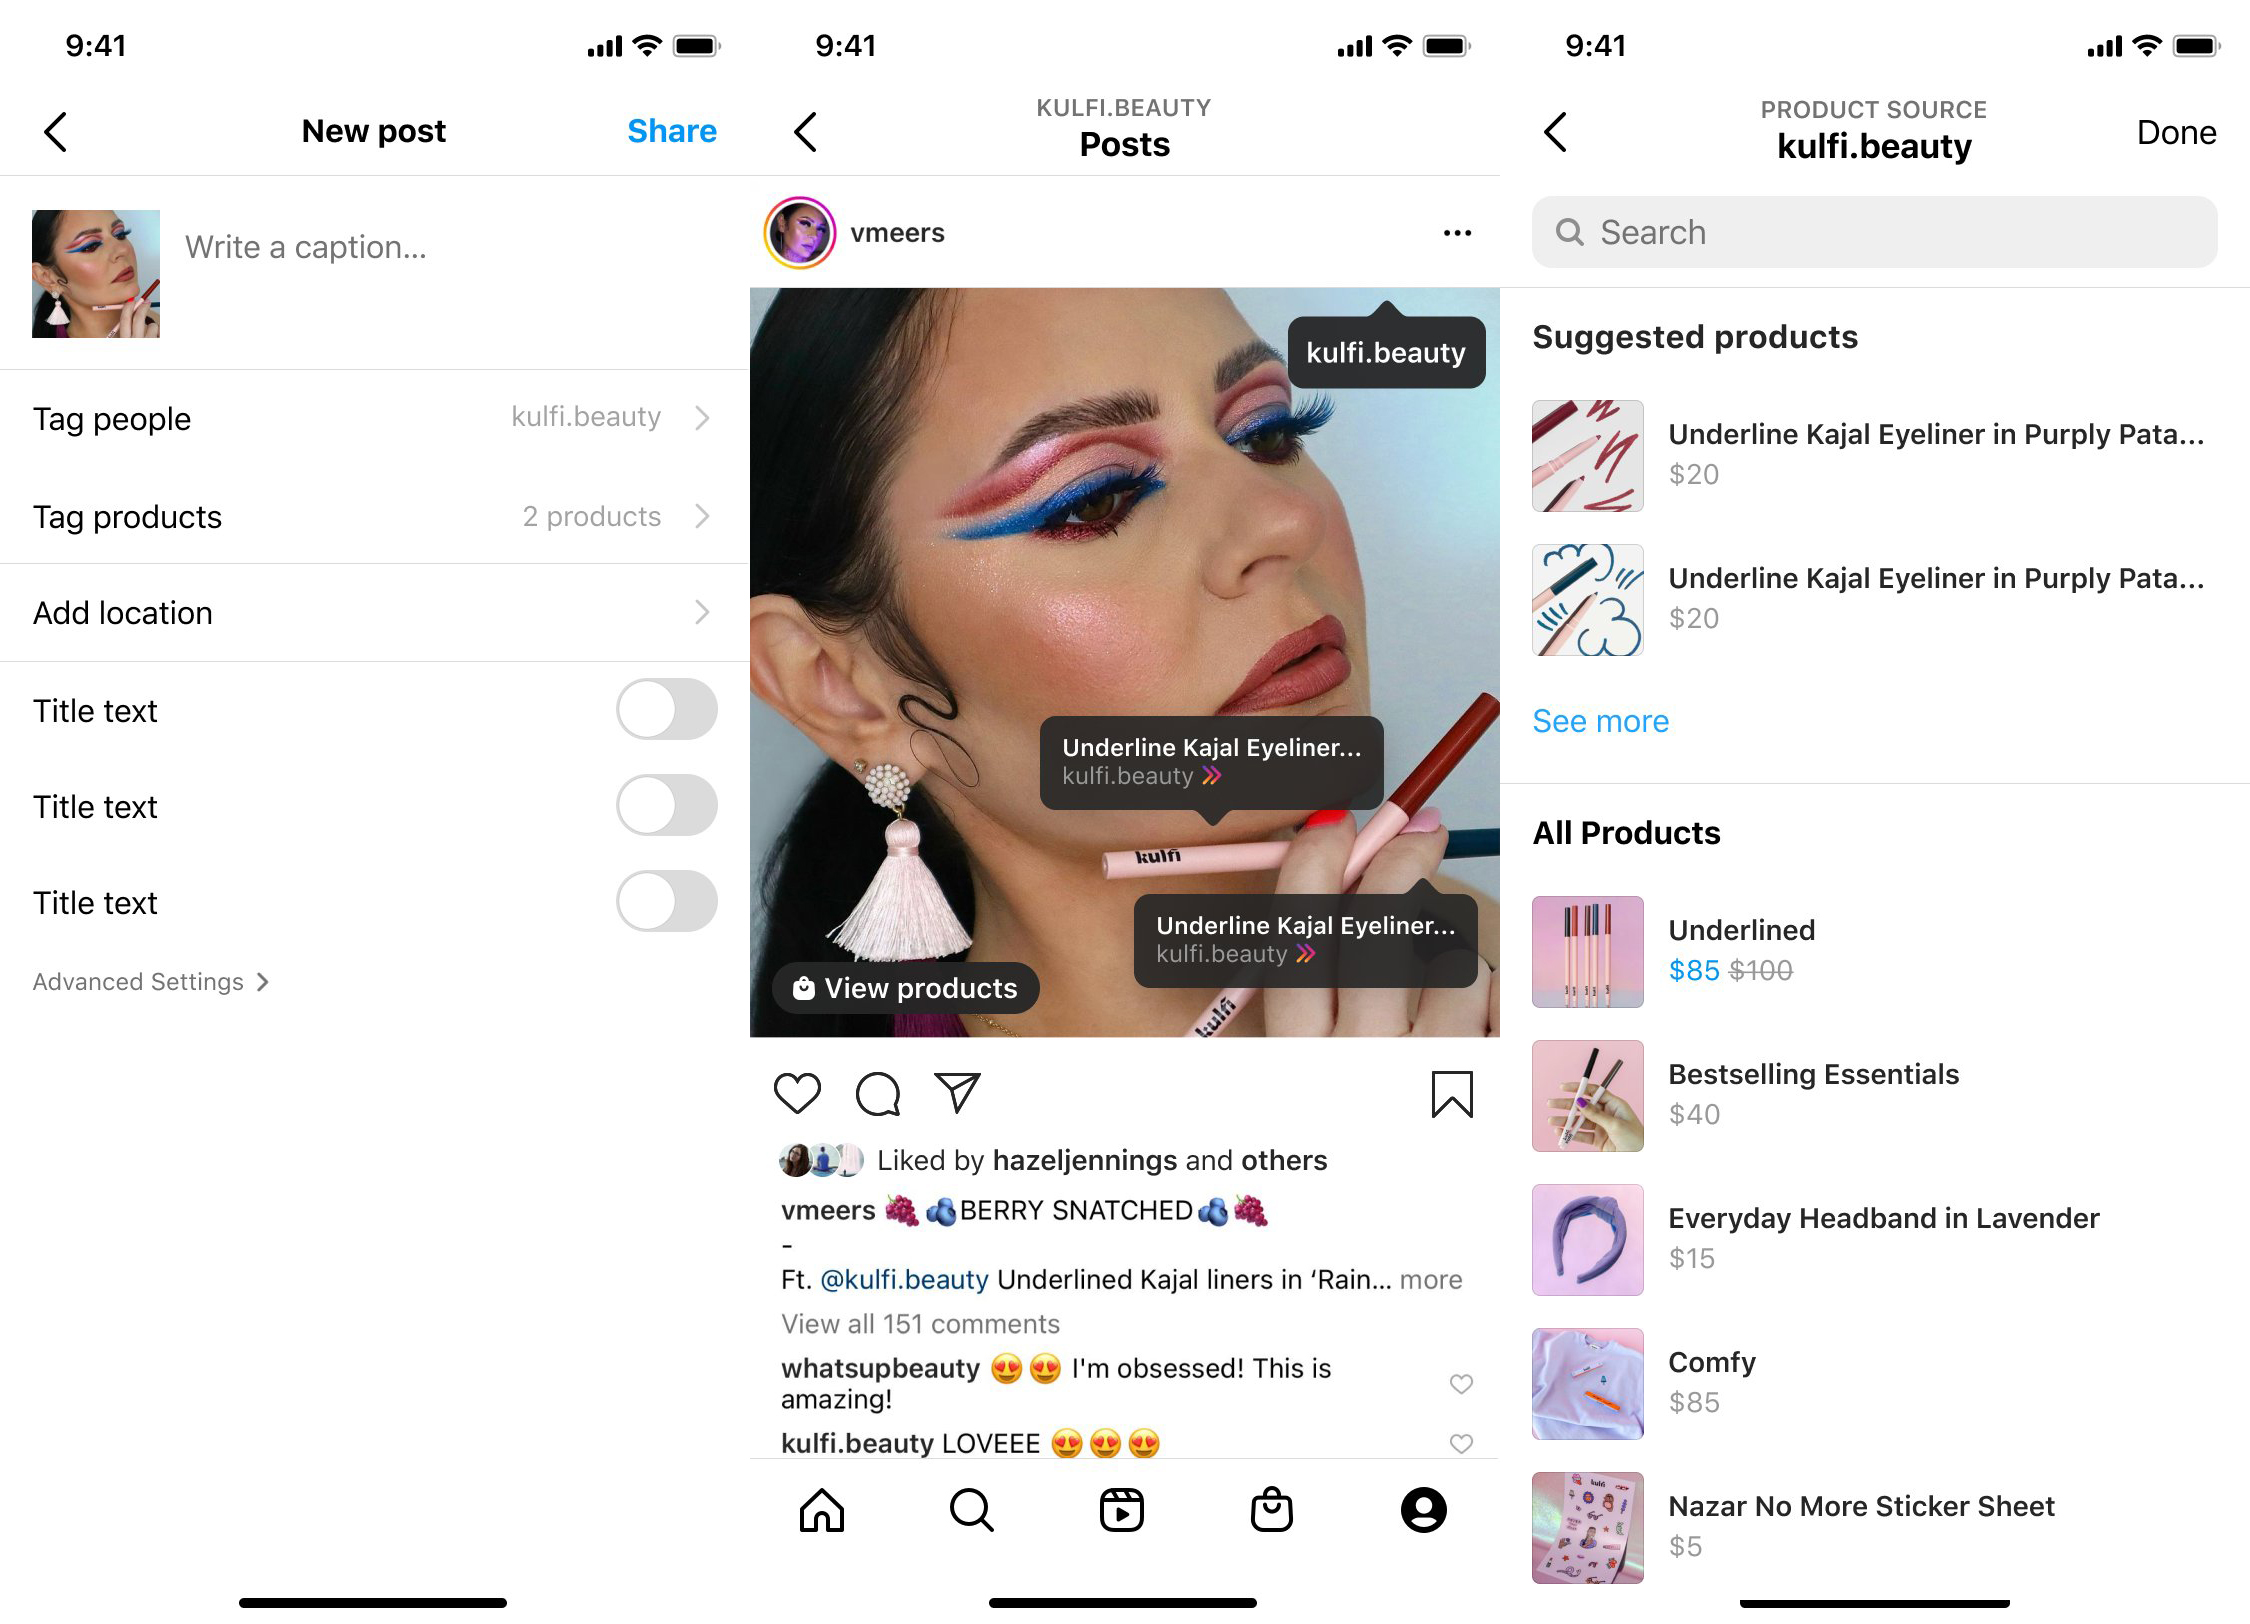 How to tag products on Instagram